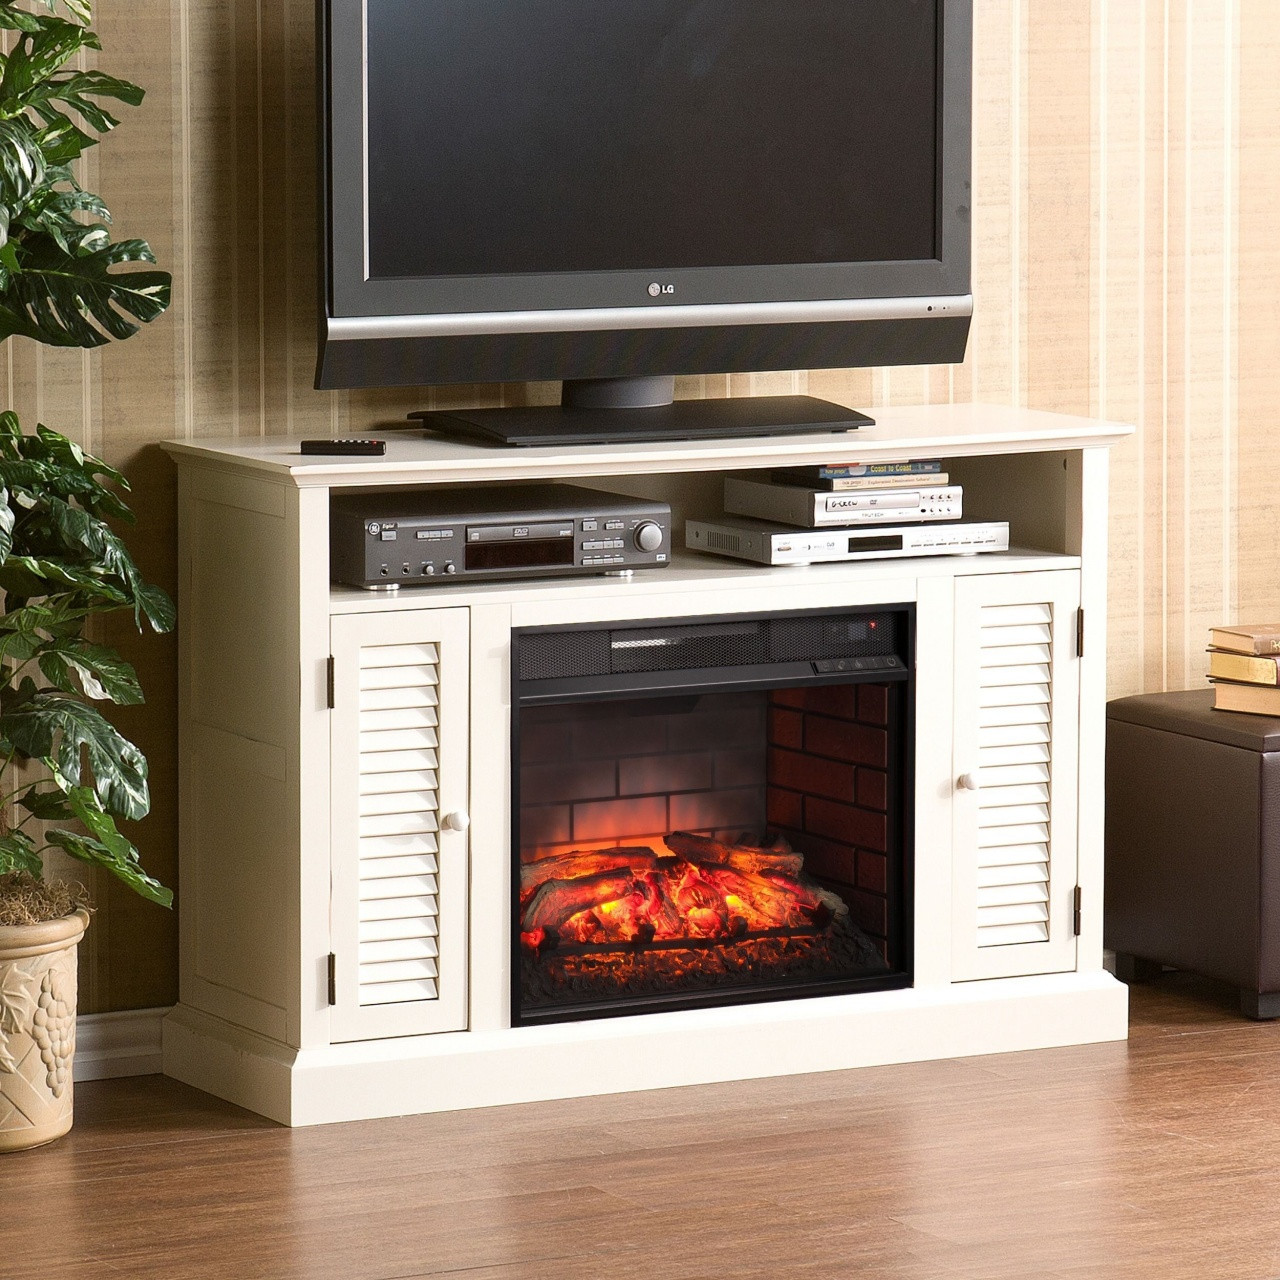 Ember Hearth Electric Media Fireplace
 What is A Gel Fuel Fireplace – FIREPLACE IDEAS